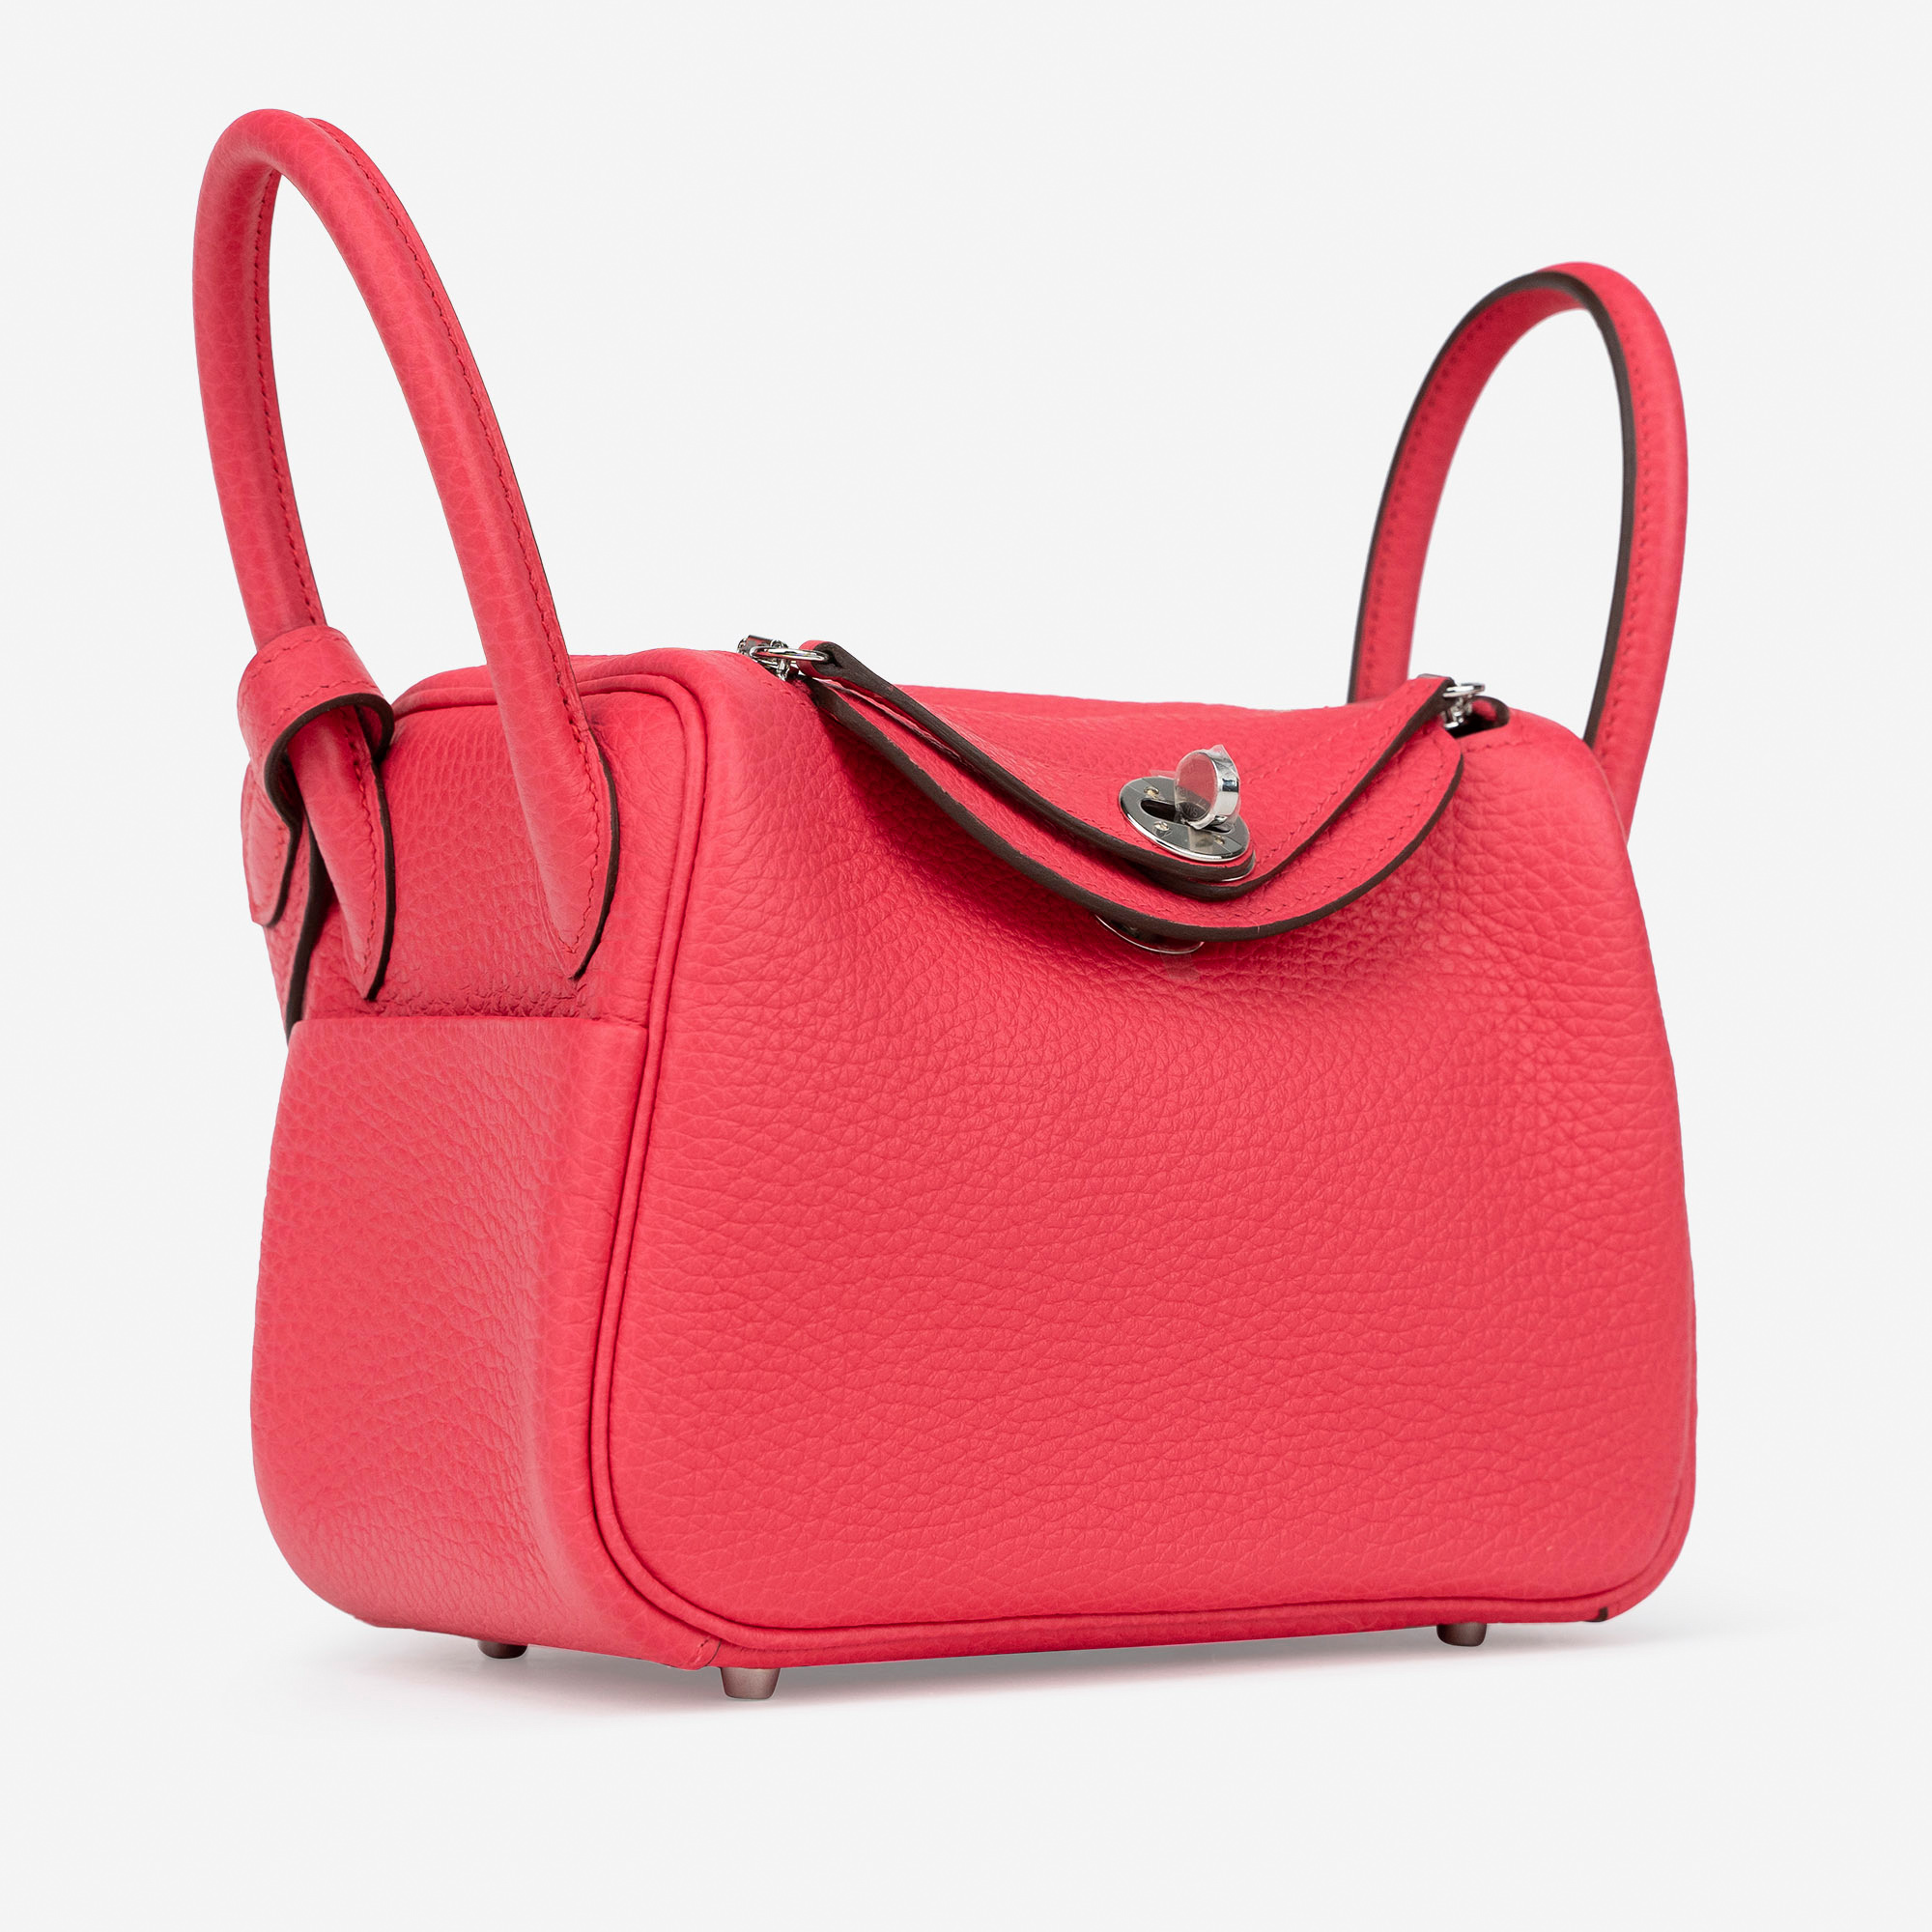 Hermes Lindy Bag Clemence 26 Red 79559465